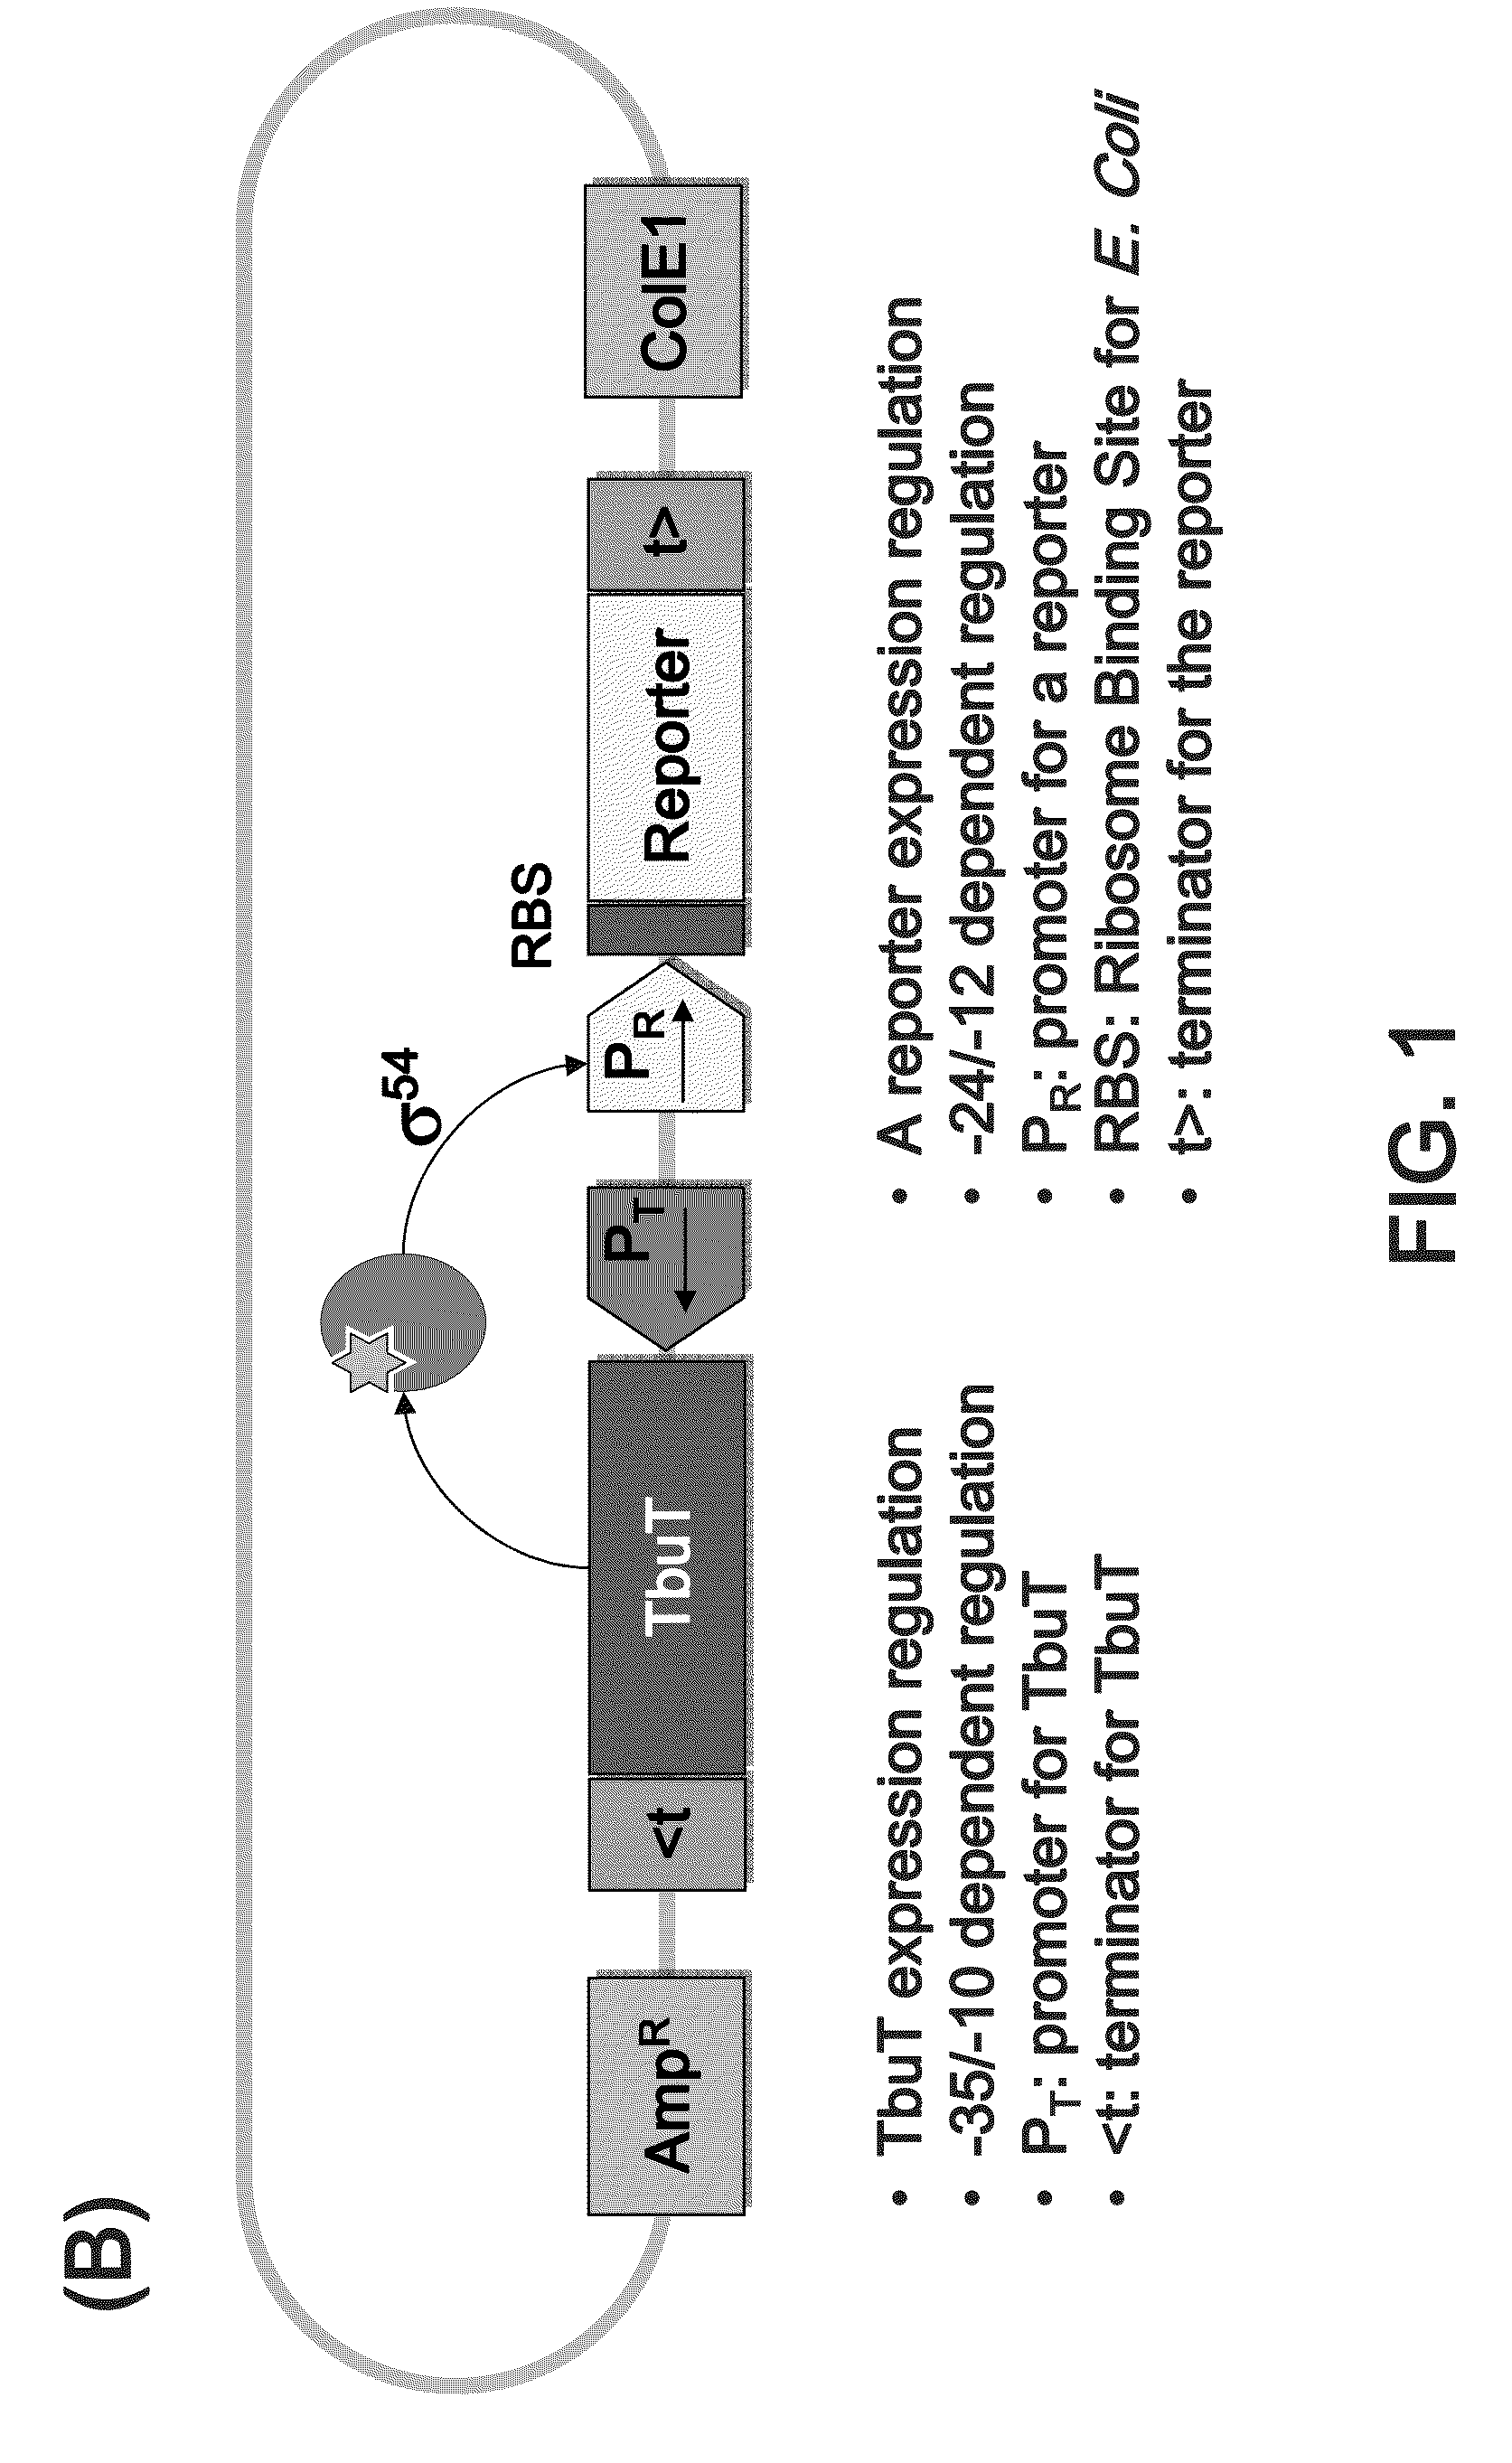 Method for screening and quantifying isoprene biosynthesis enzyme activity